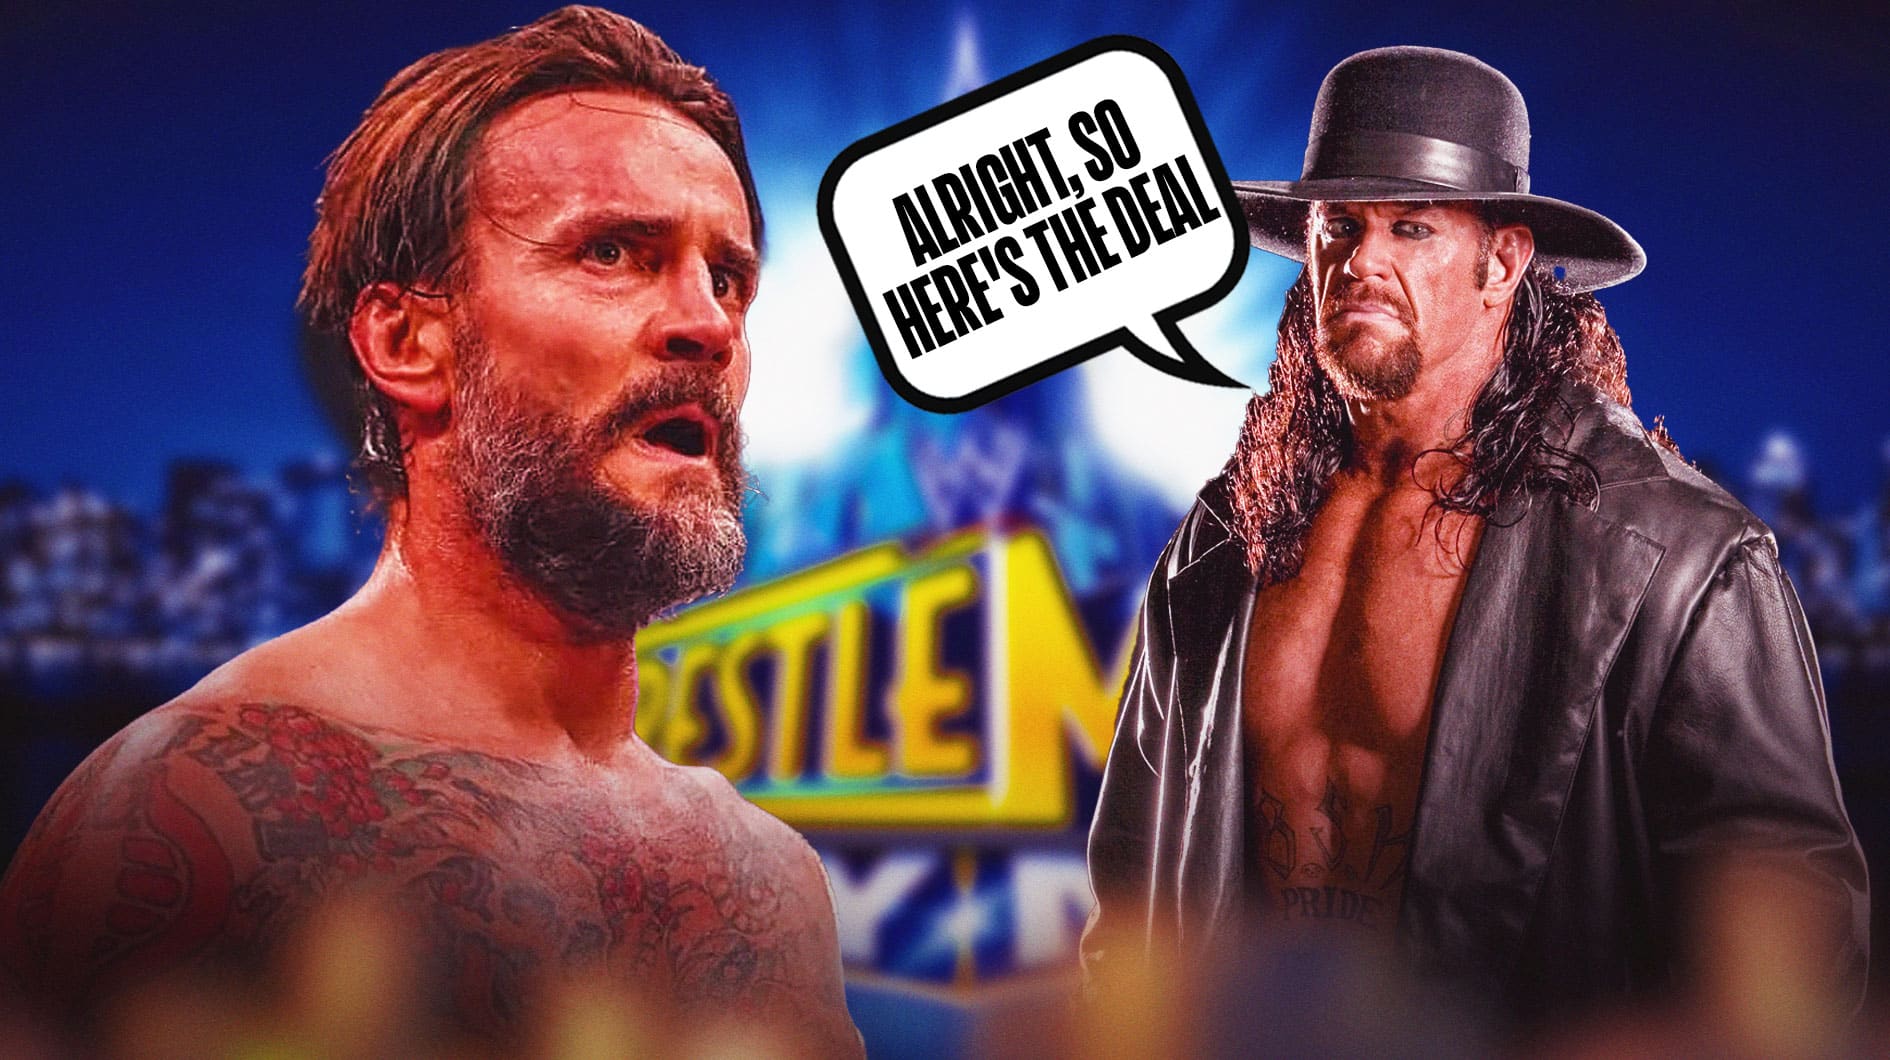 The Undertaker sets the record straight on his perceived feud with CM Punk